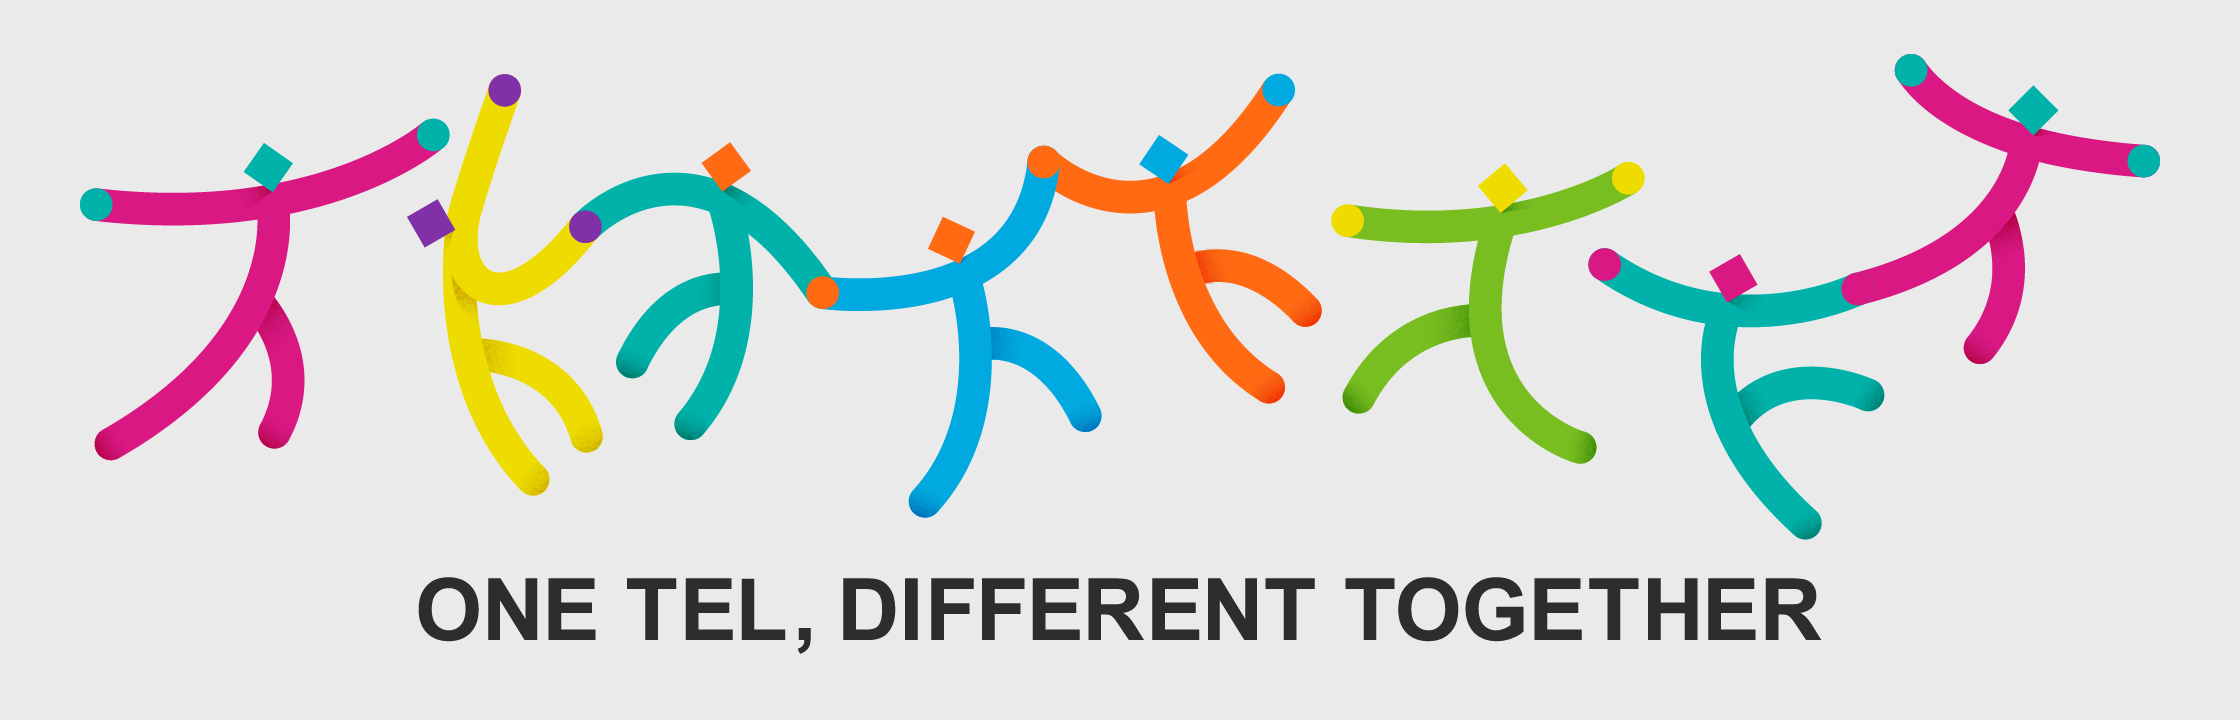 This image shows TEL’s DE&I catchphrase “ONE TEL, DIFFERENT TOGETHER”.